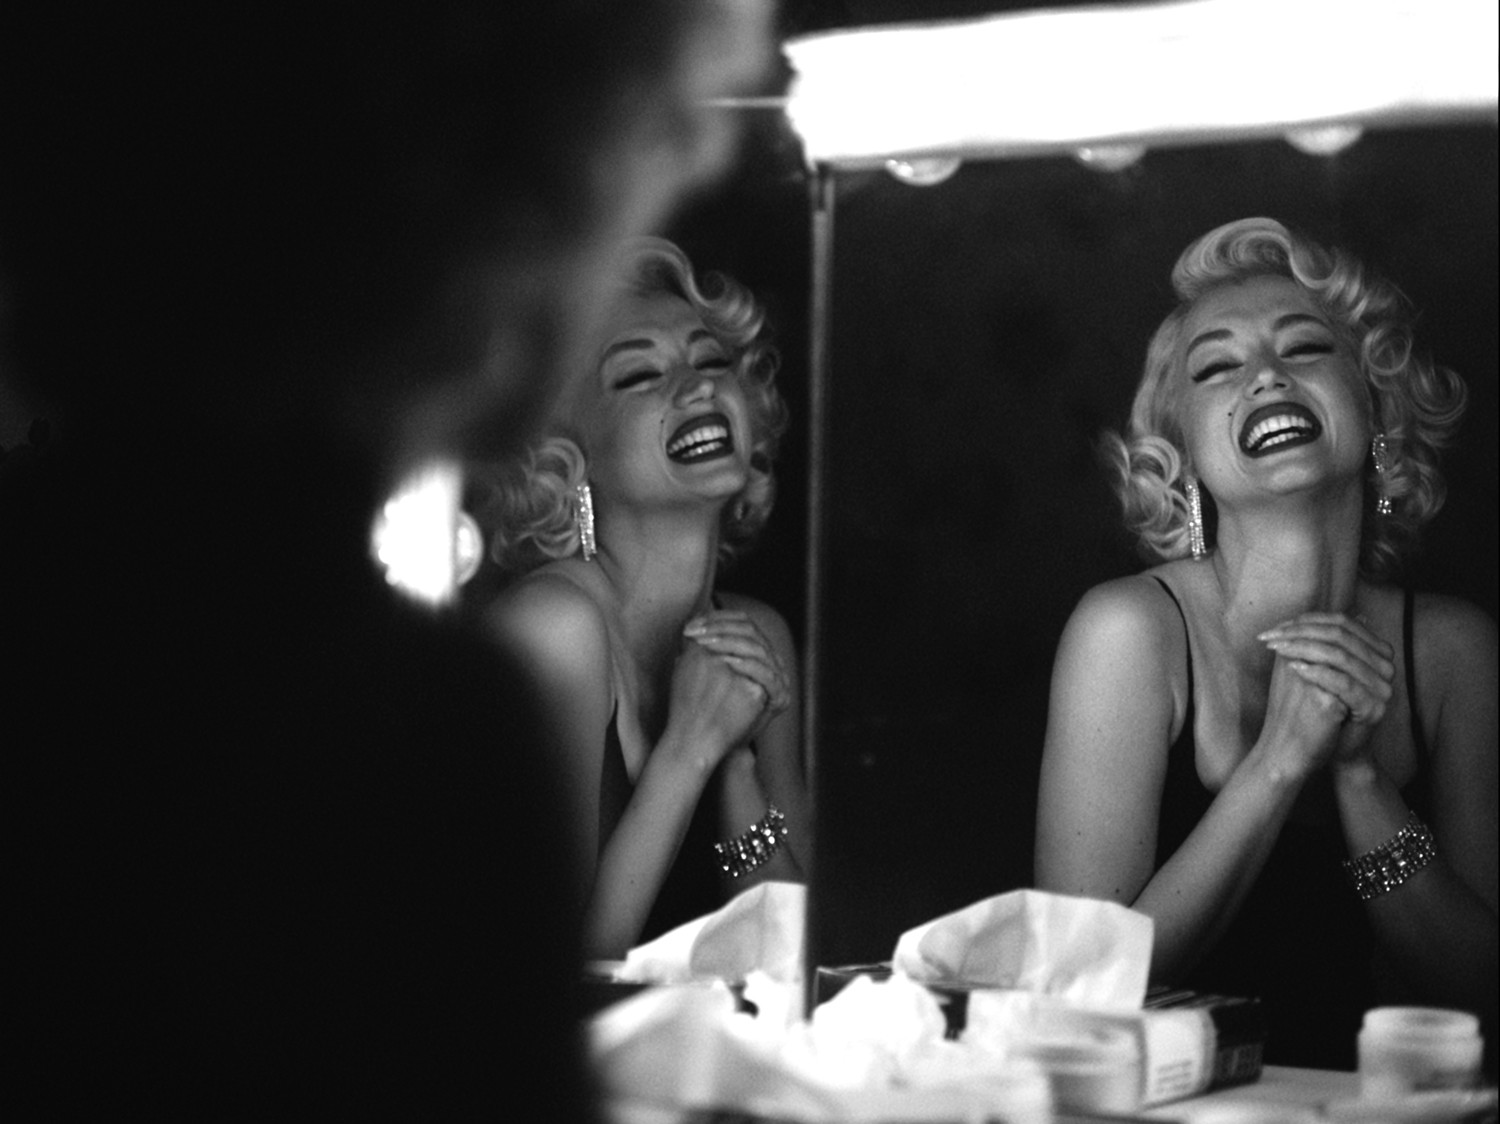 Andrew Dominik uses Marilyn Monroe as a vehicle for stylistic excess in the misguided Blonde